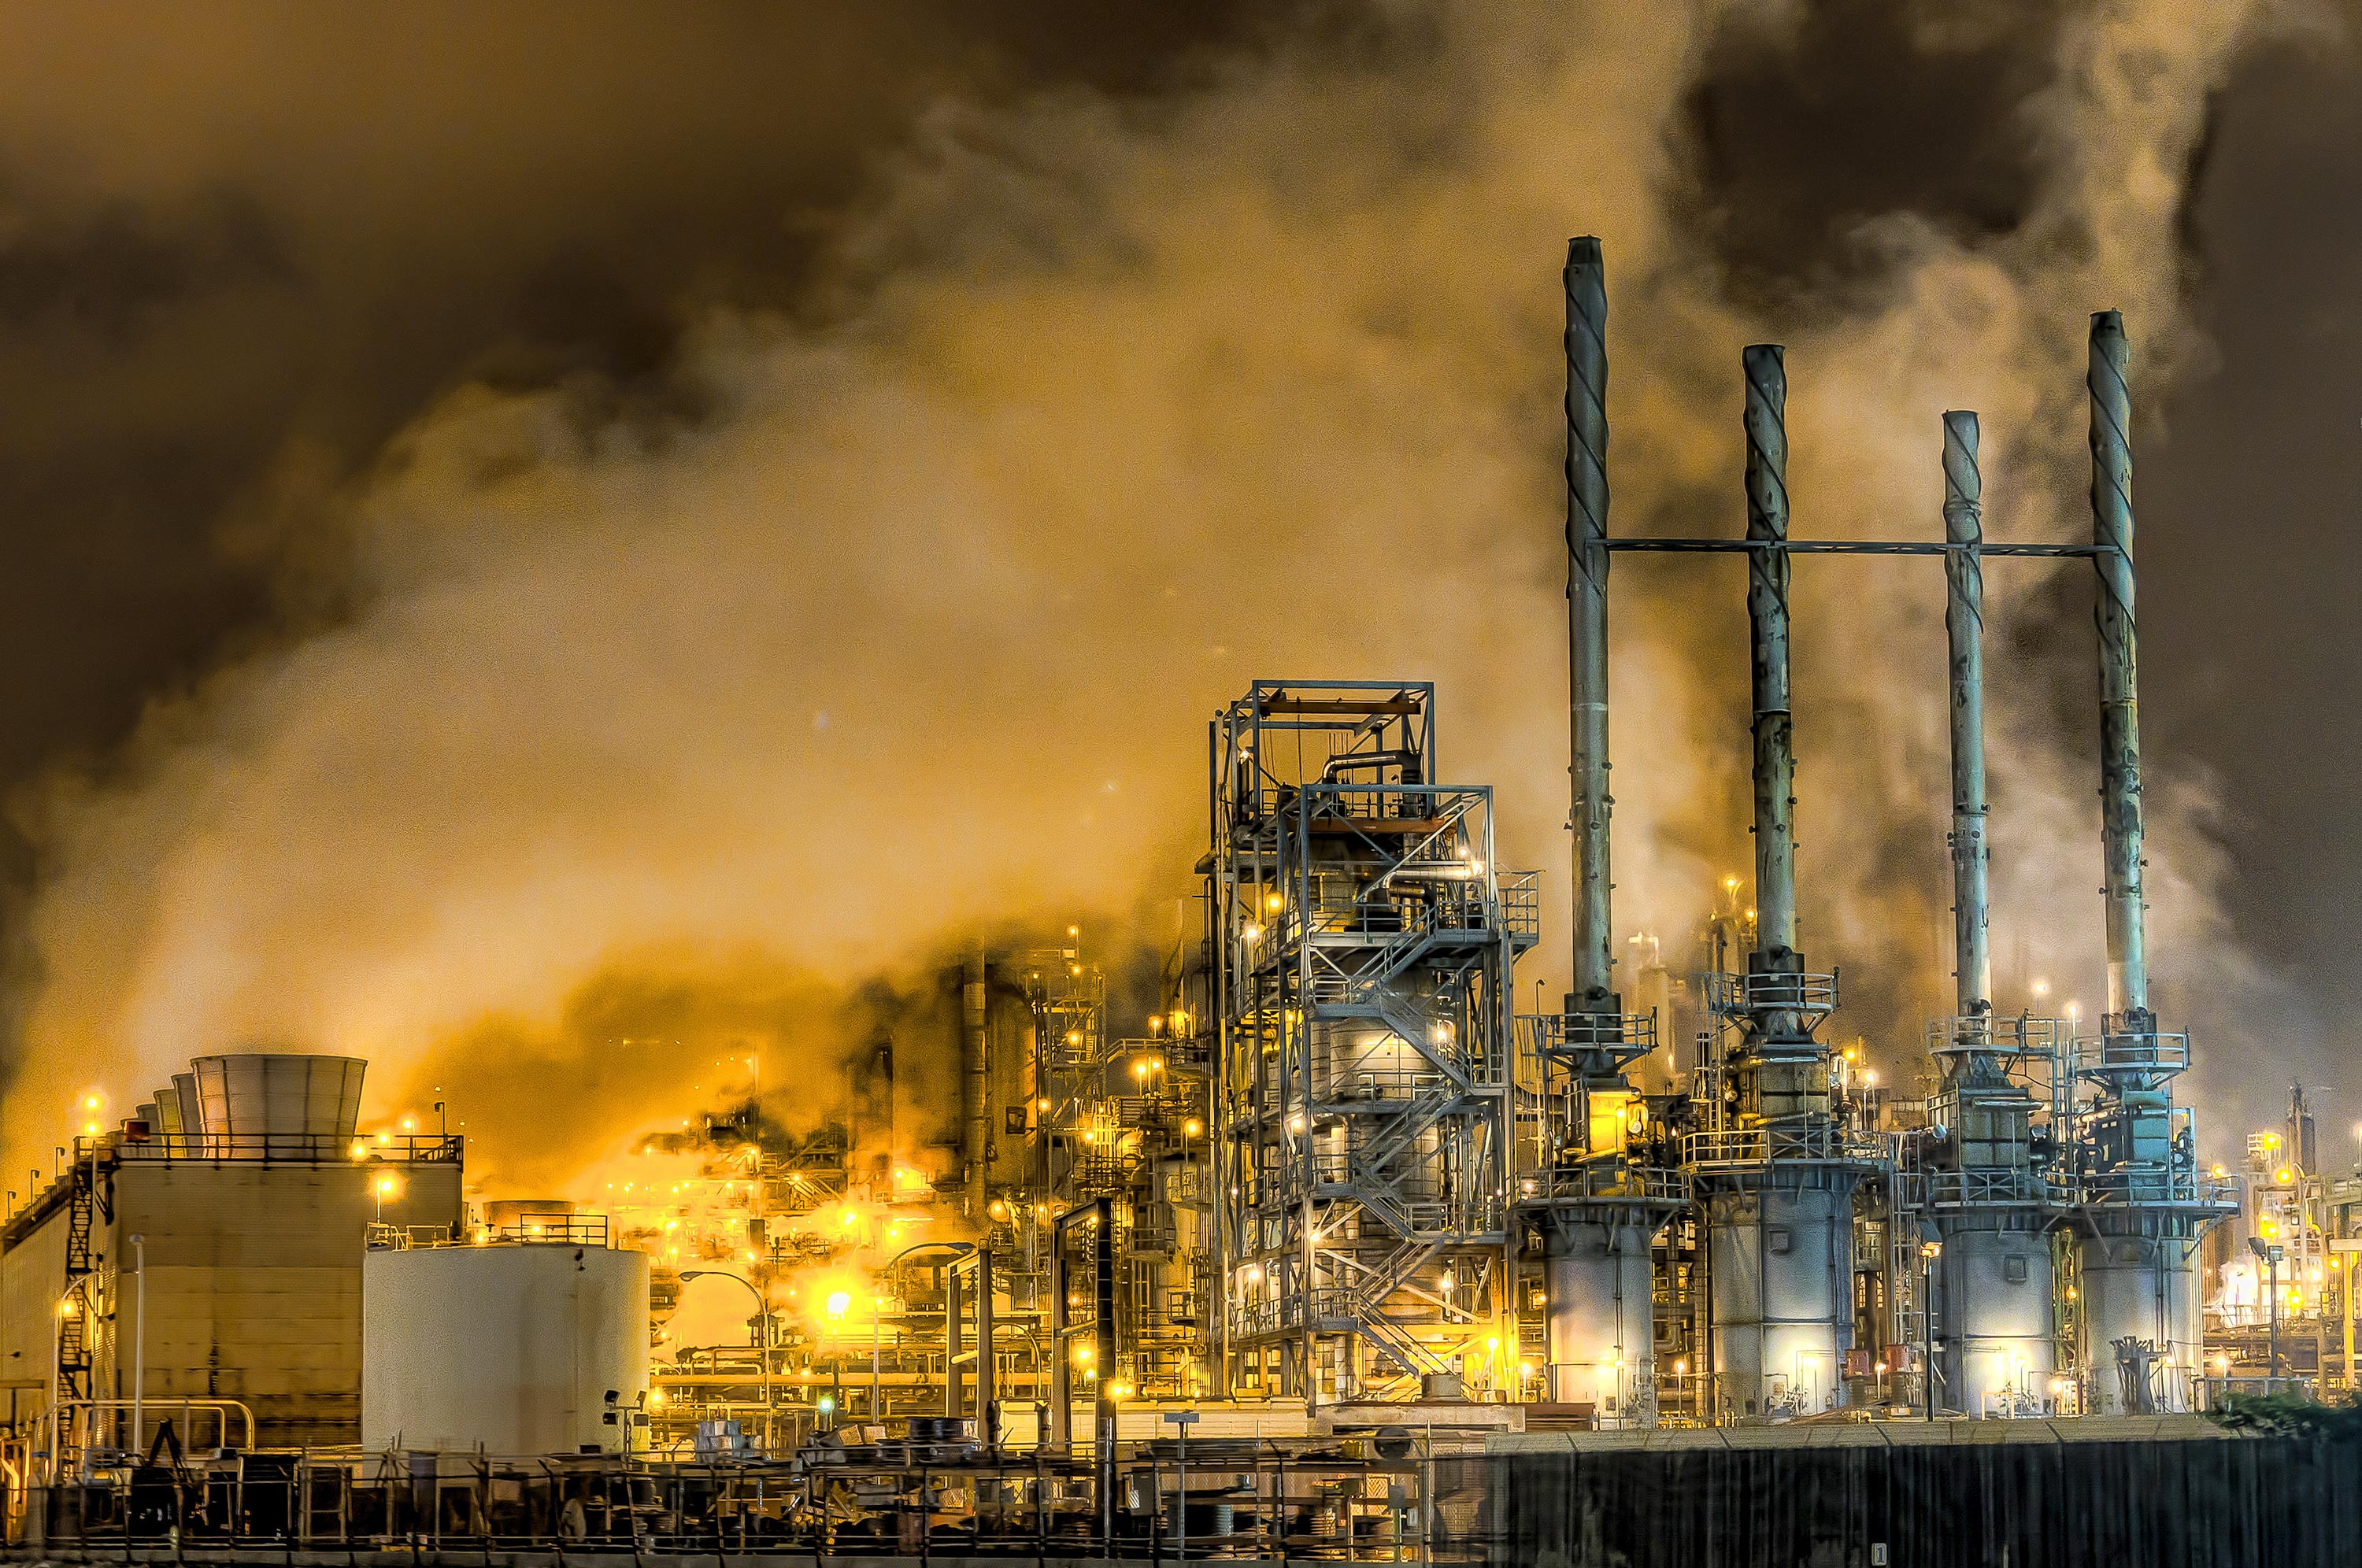 An oil refinery in Los Angeles, near the L.A. Harbor, on approximately 930 acres. Photographer: Chris Valle/Getty Images